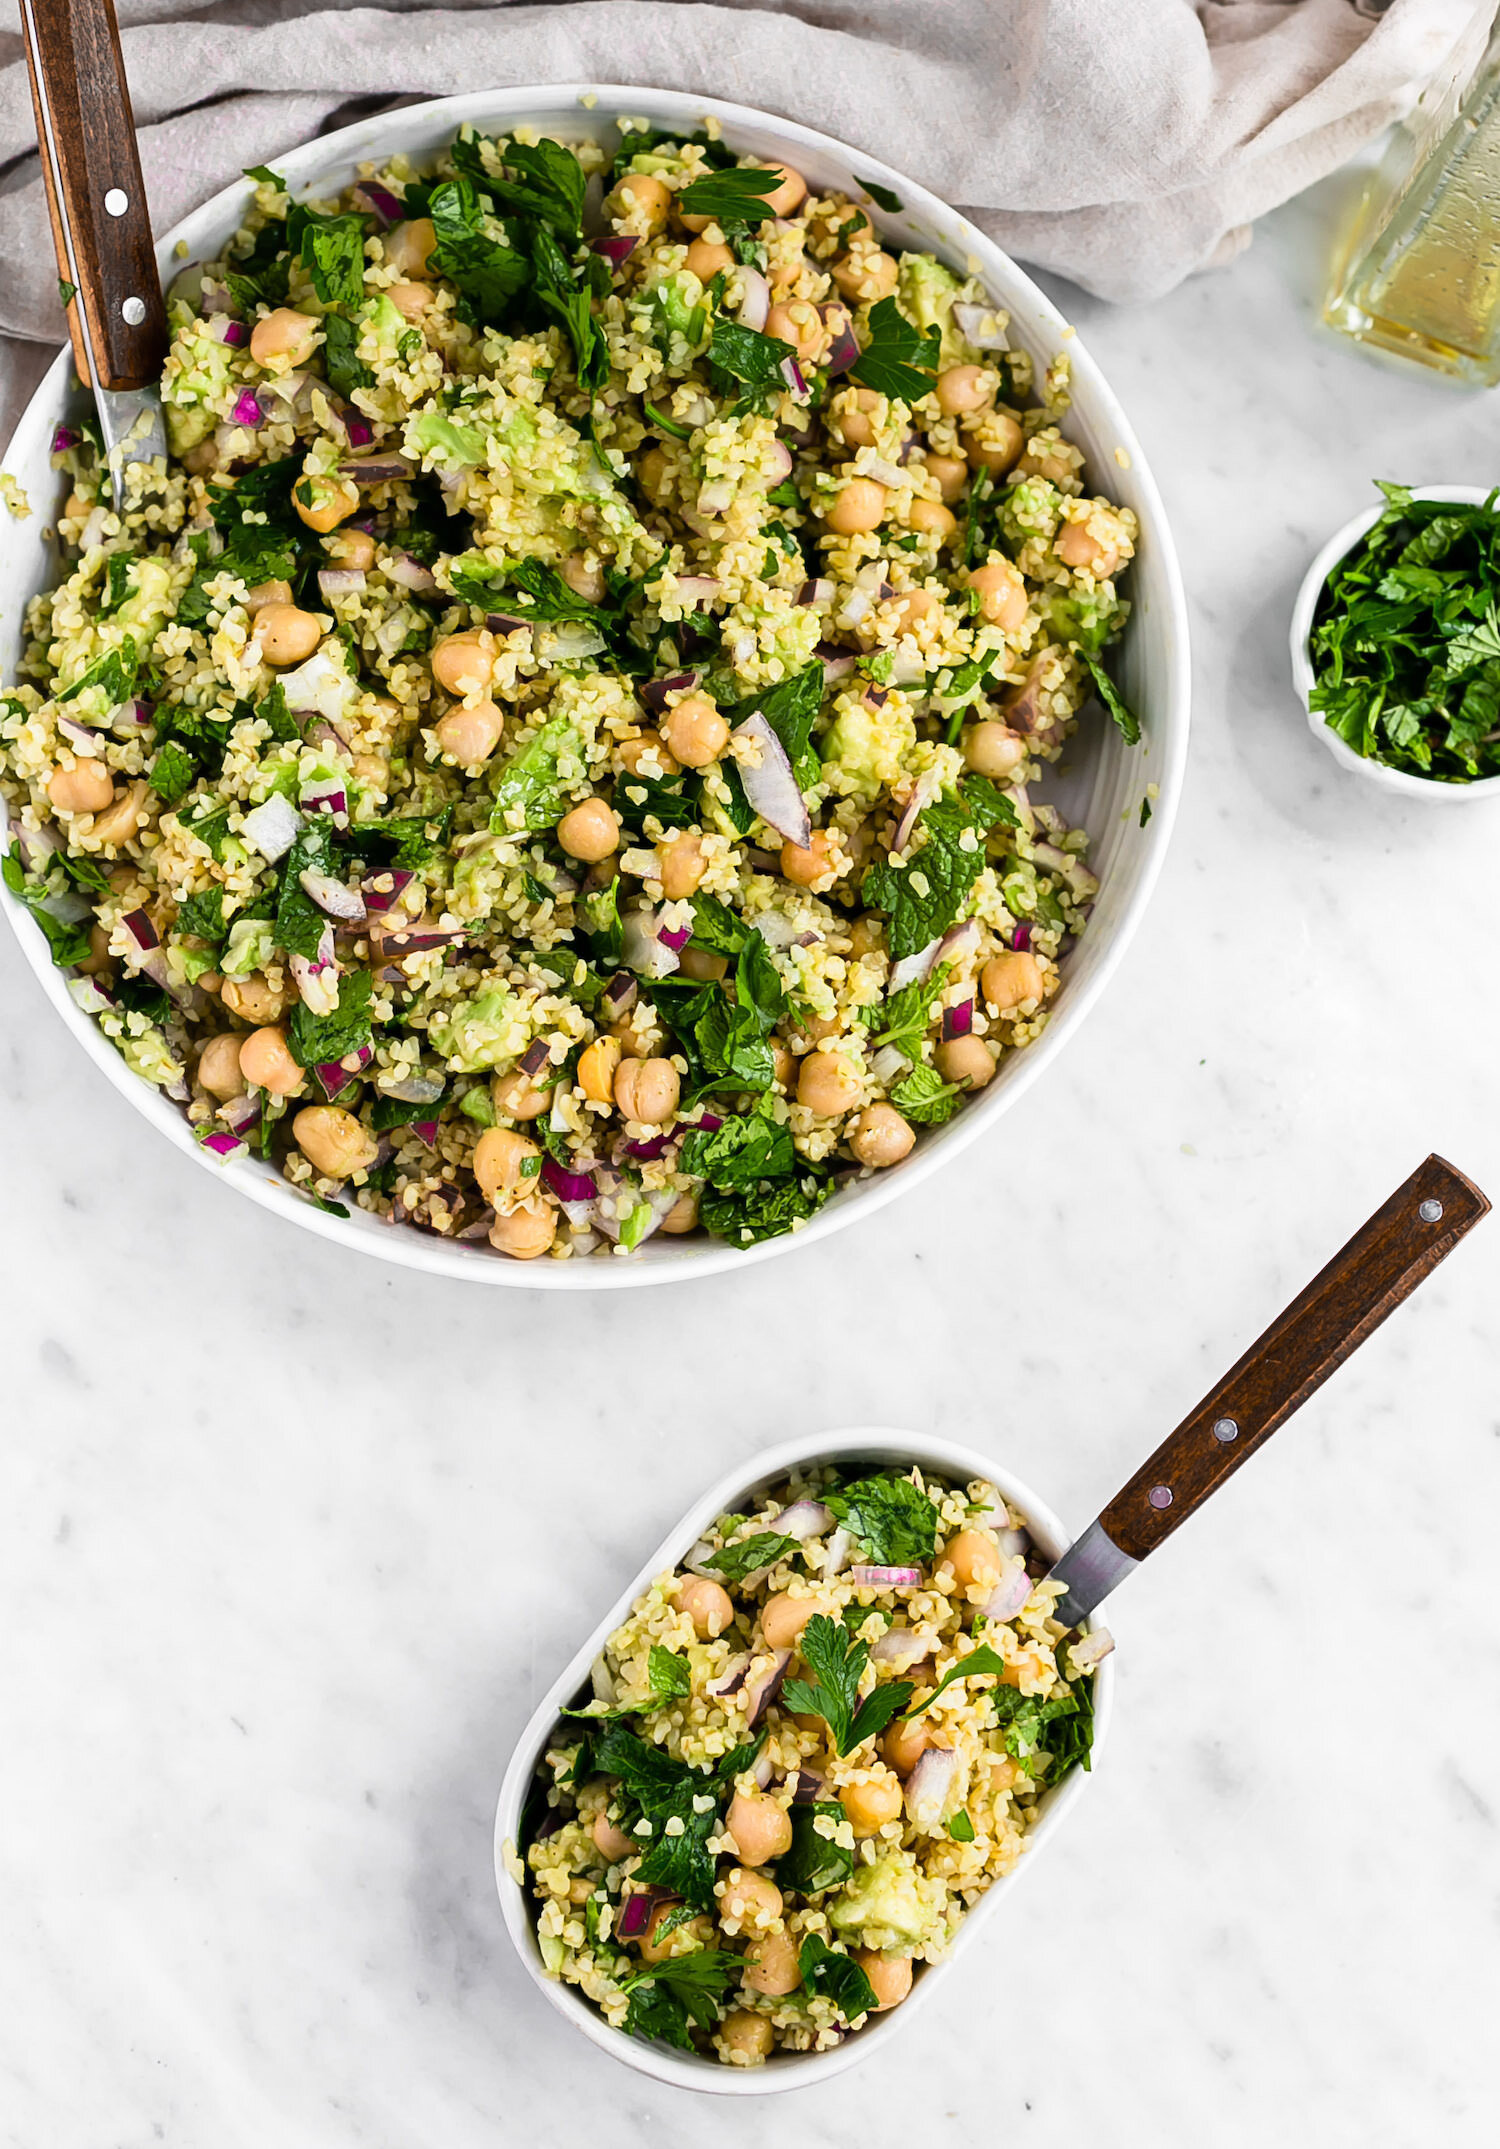 Springy Bulgur Herb Salad | Truffles and Trends